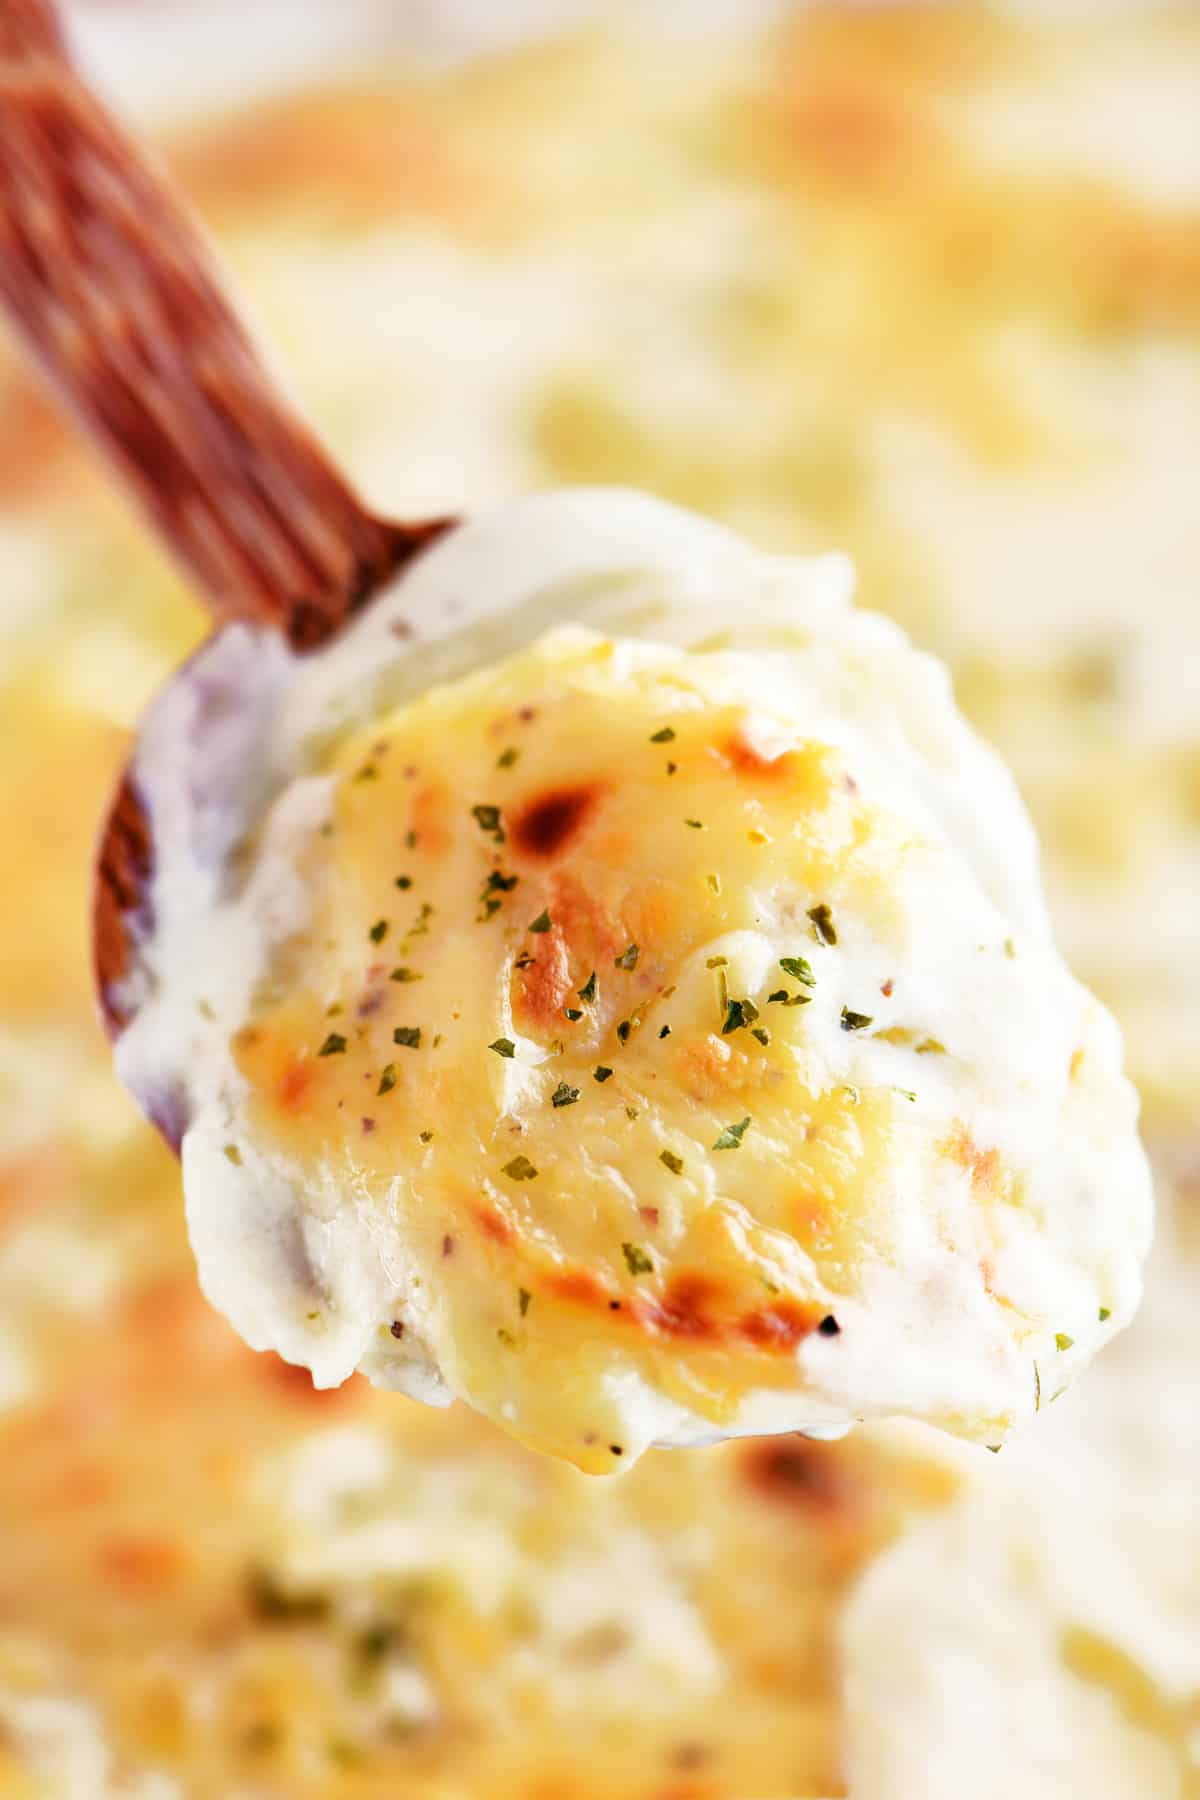 Wooden spoonful of scalloped potatoes.